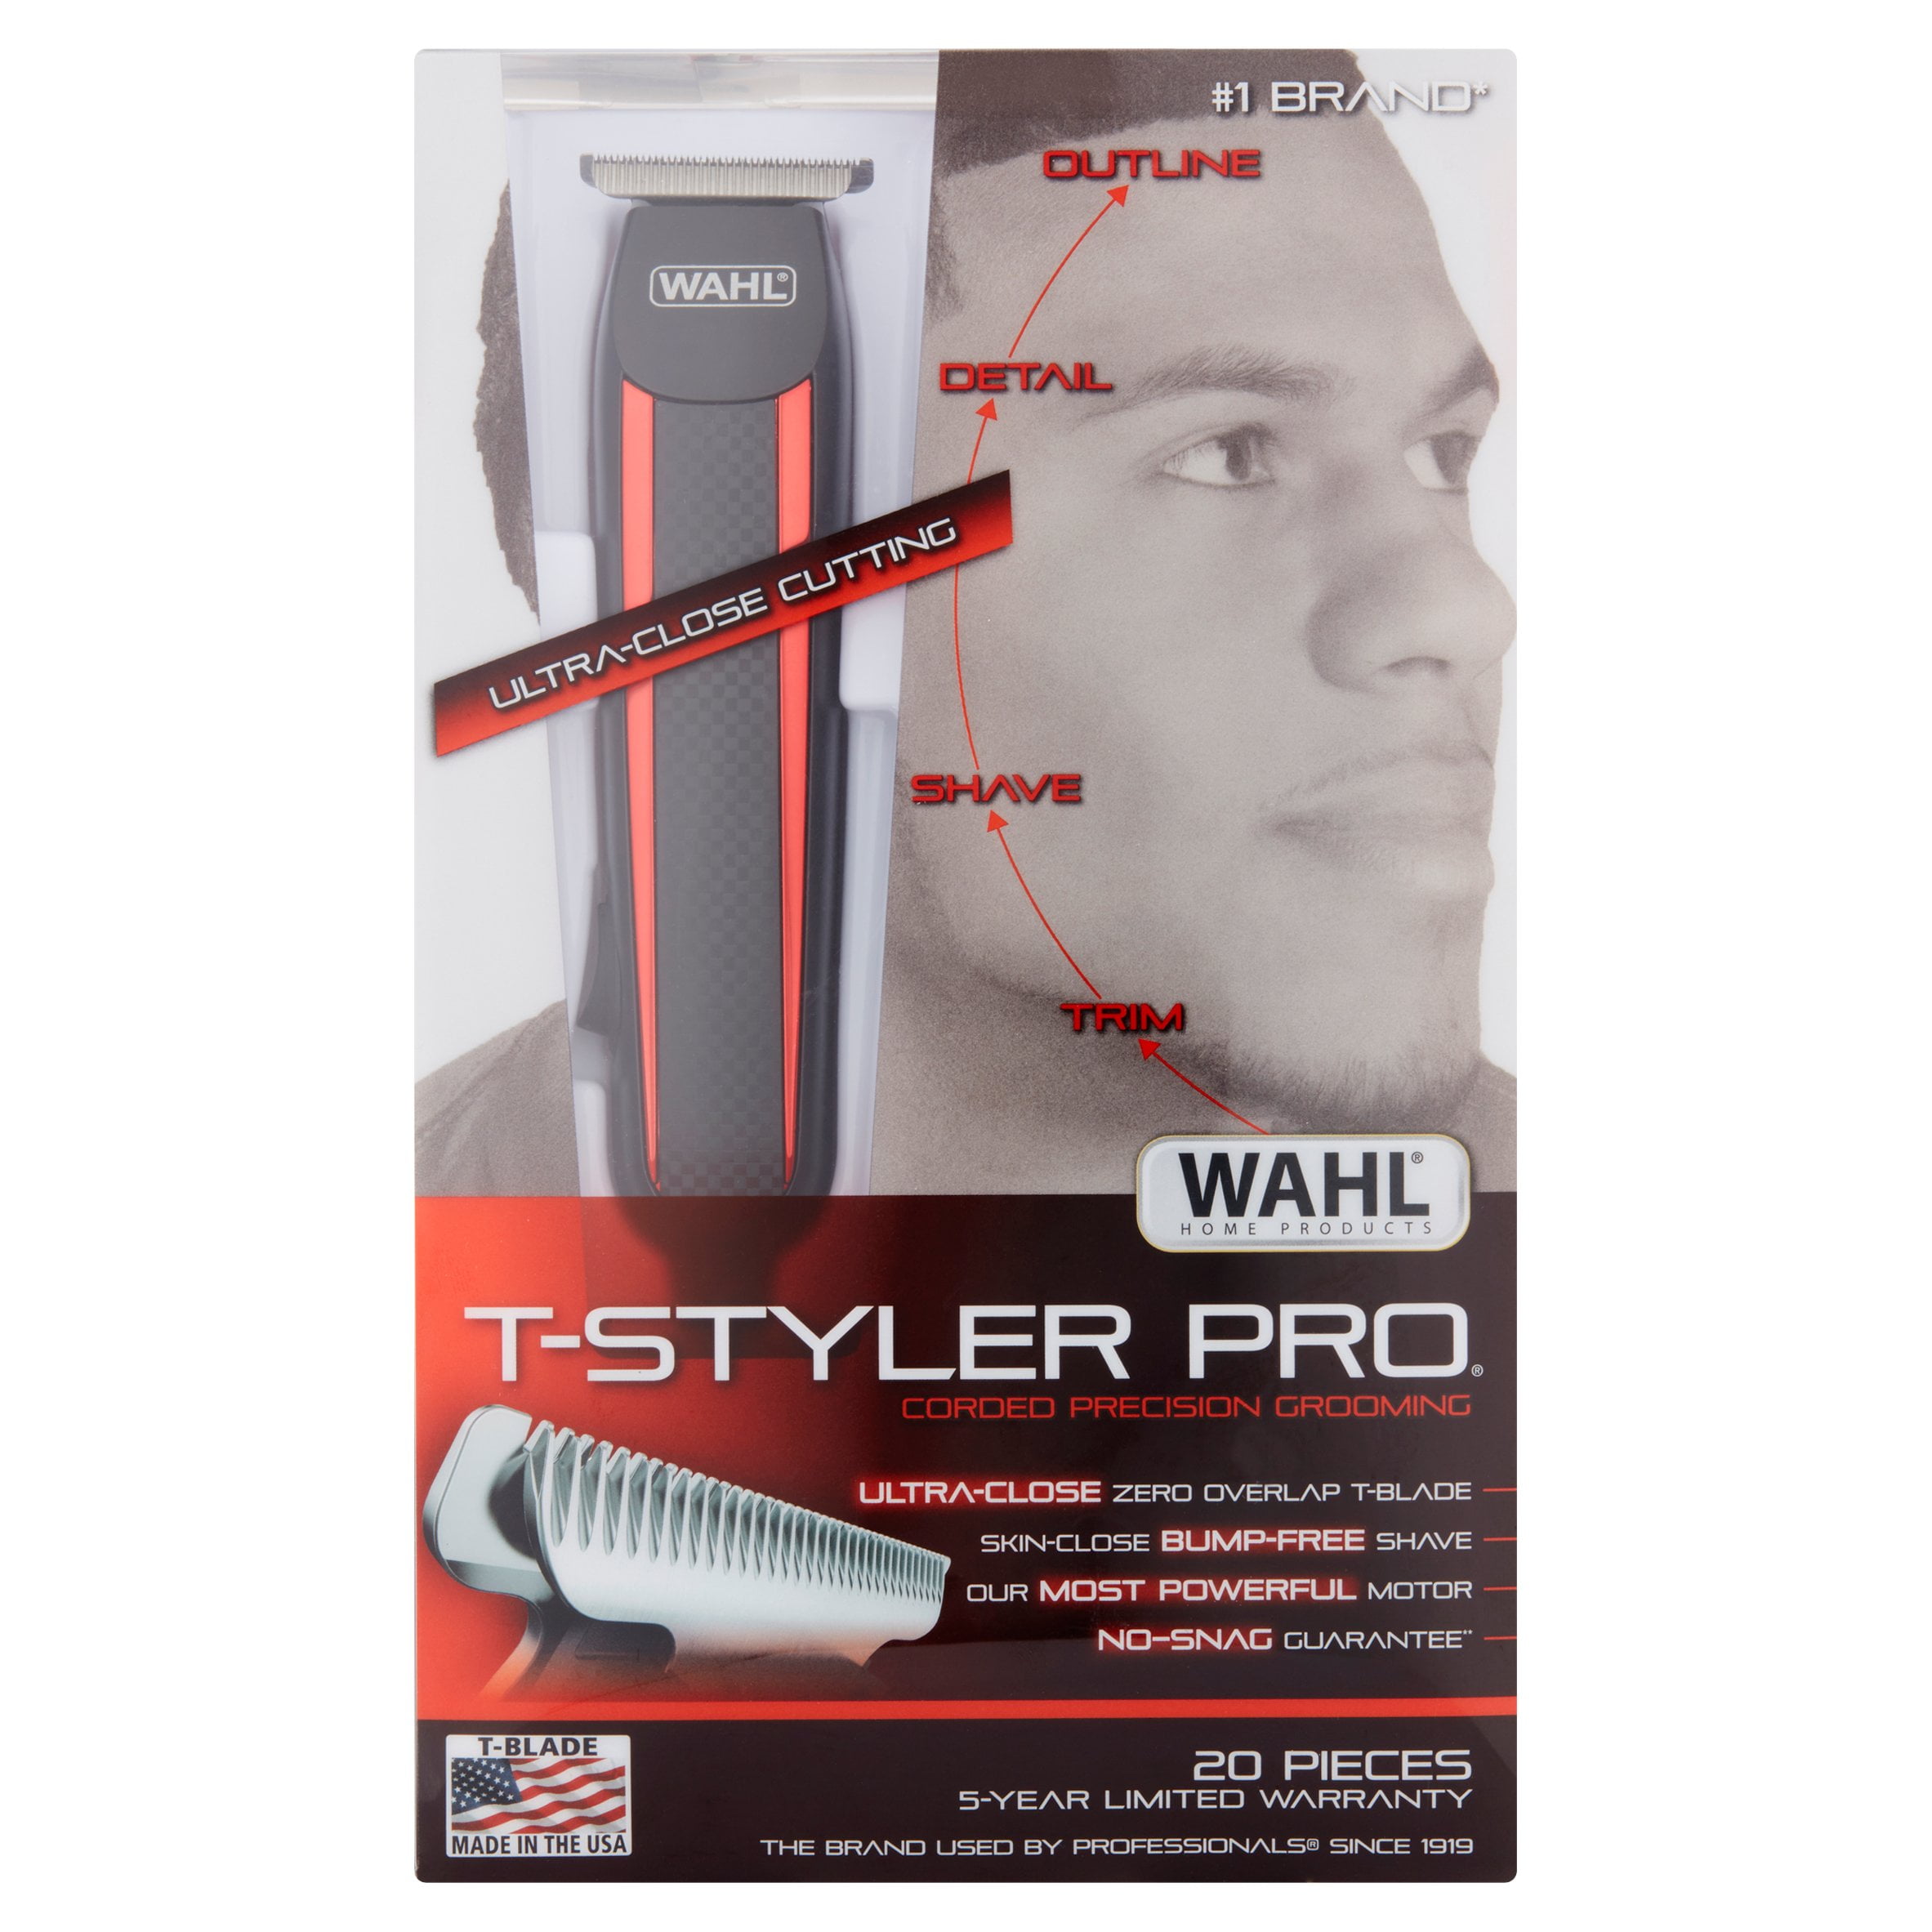 wahl edge pro corded precision grooming